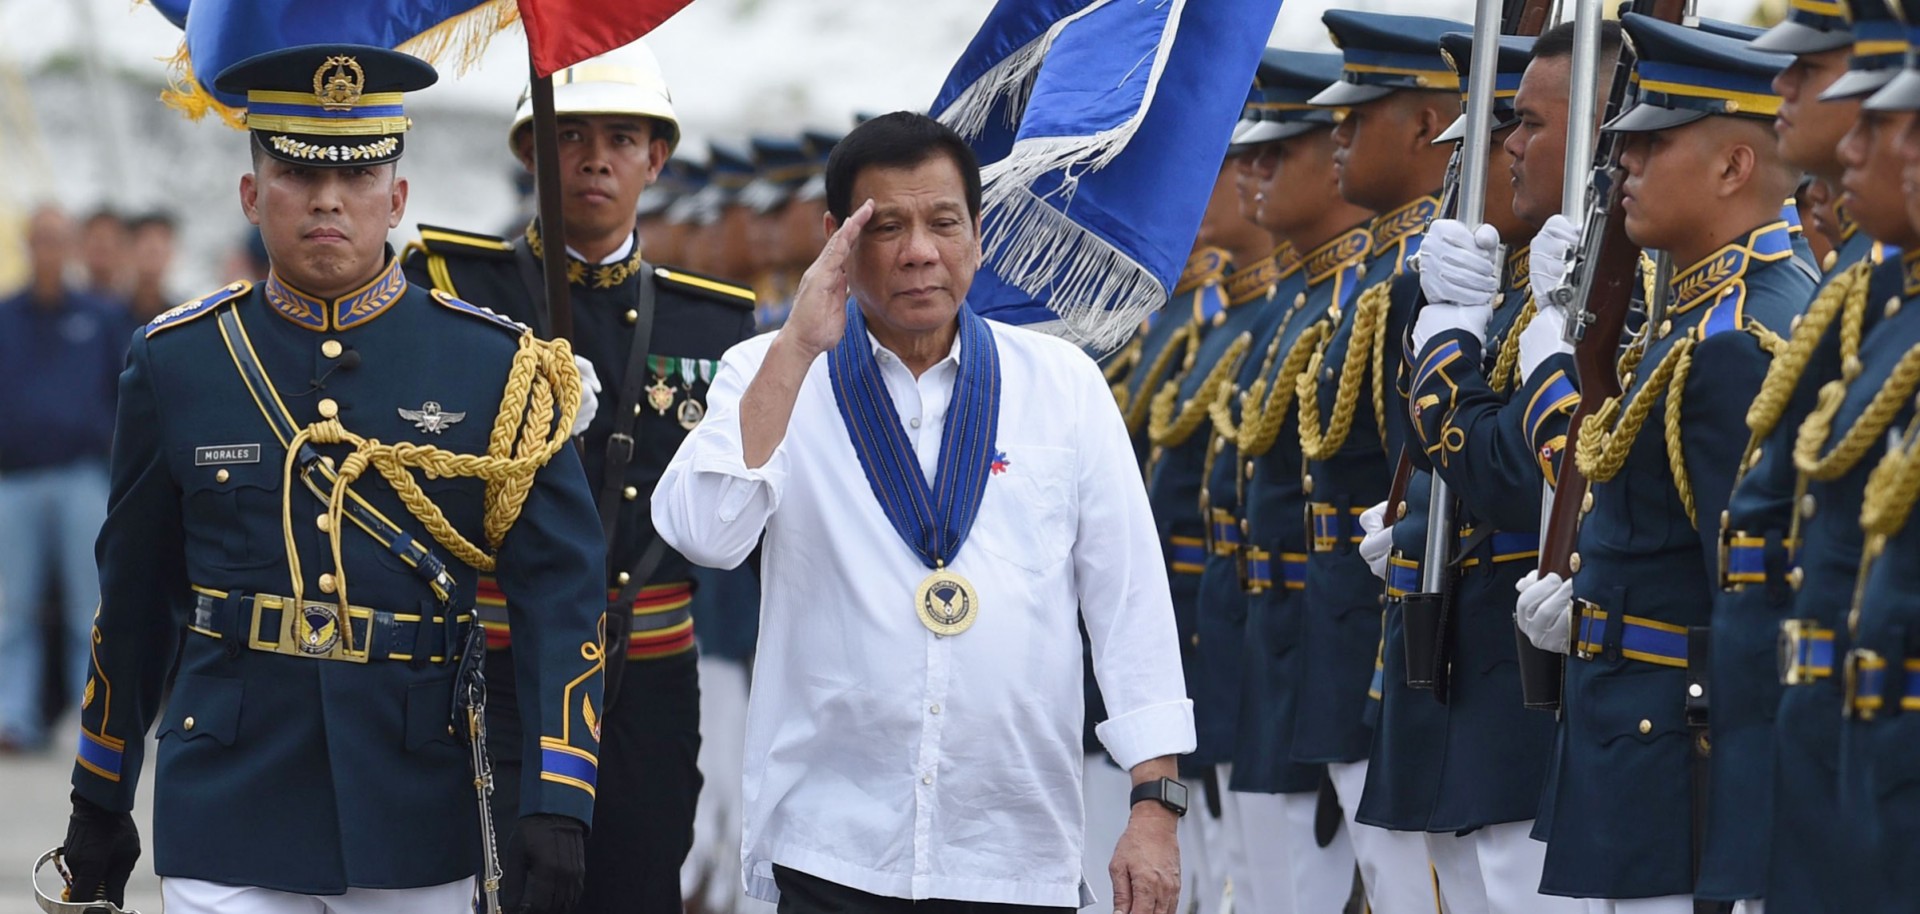 Less than a year into his term, Philippine President Rodrigo Duterte is on shaky ground. But he still has enough support among the population, the legislature and the country's biggest power brokers to fend off threats to his rule.